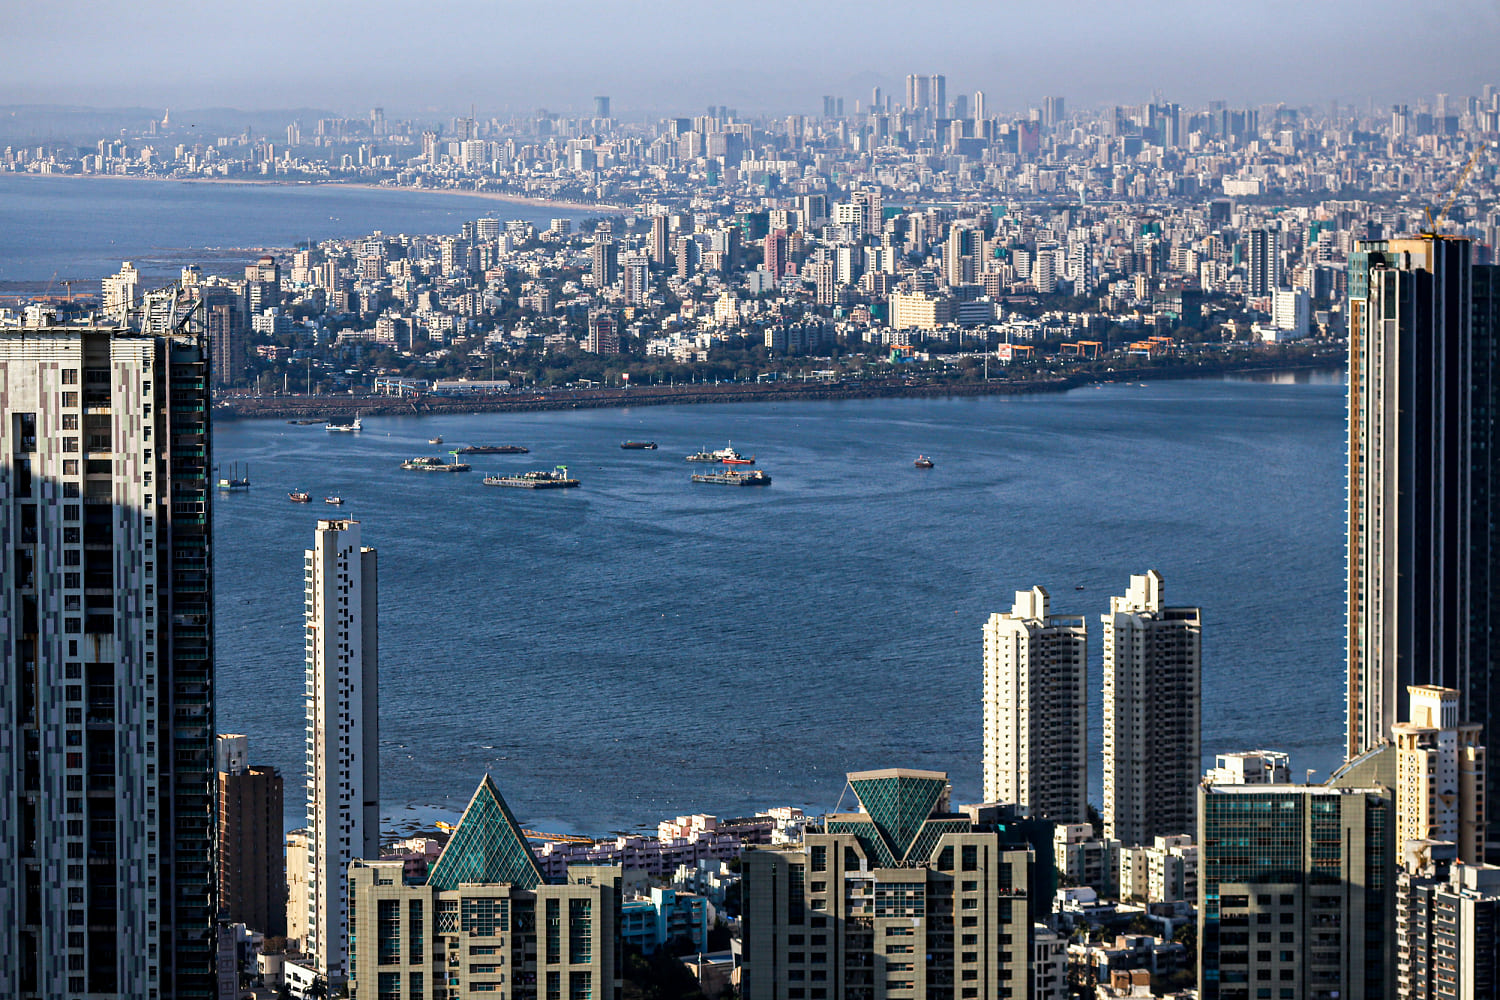 Mumbai overtakes Beijing to become Asia's billionaire capital for the first time